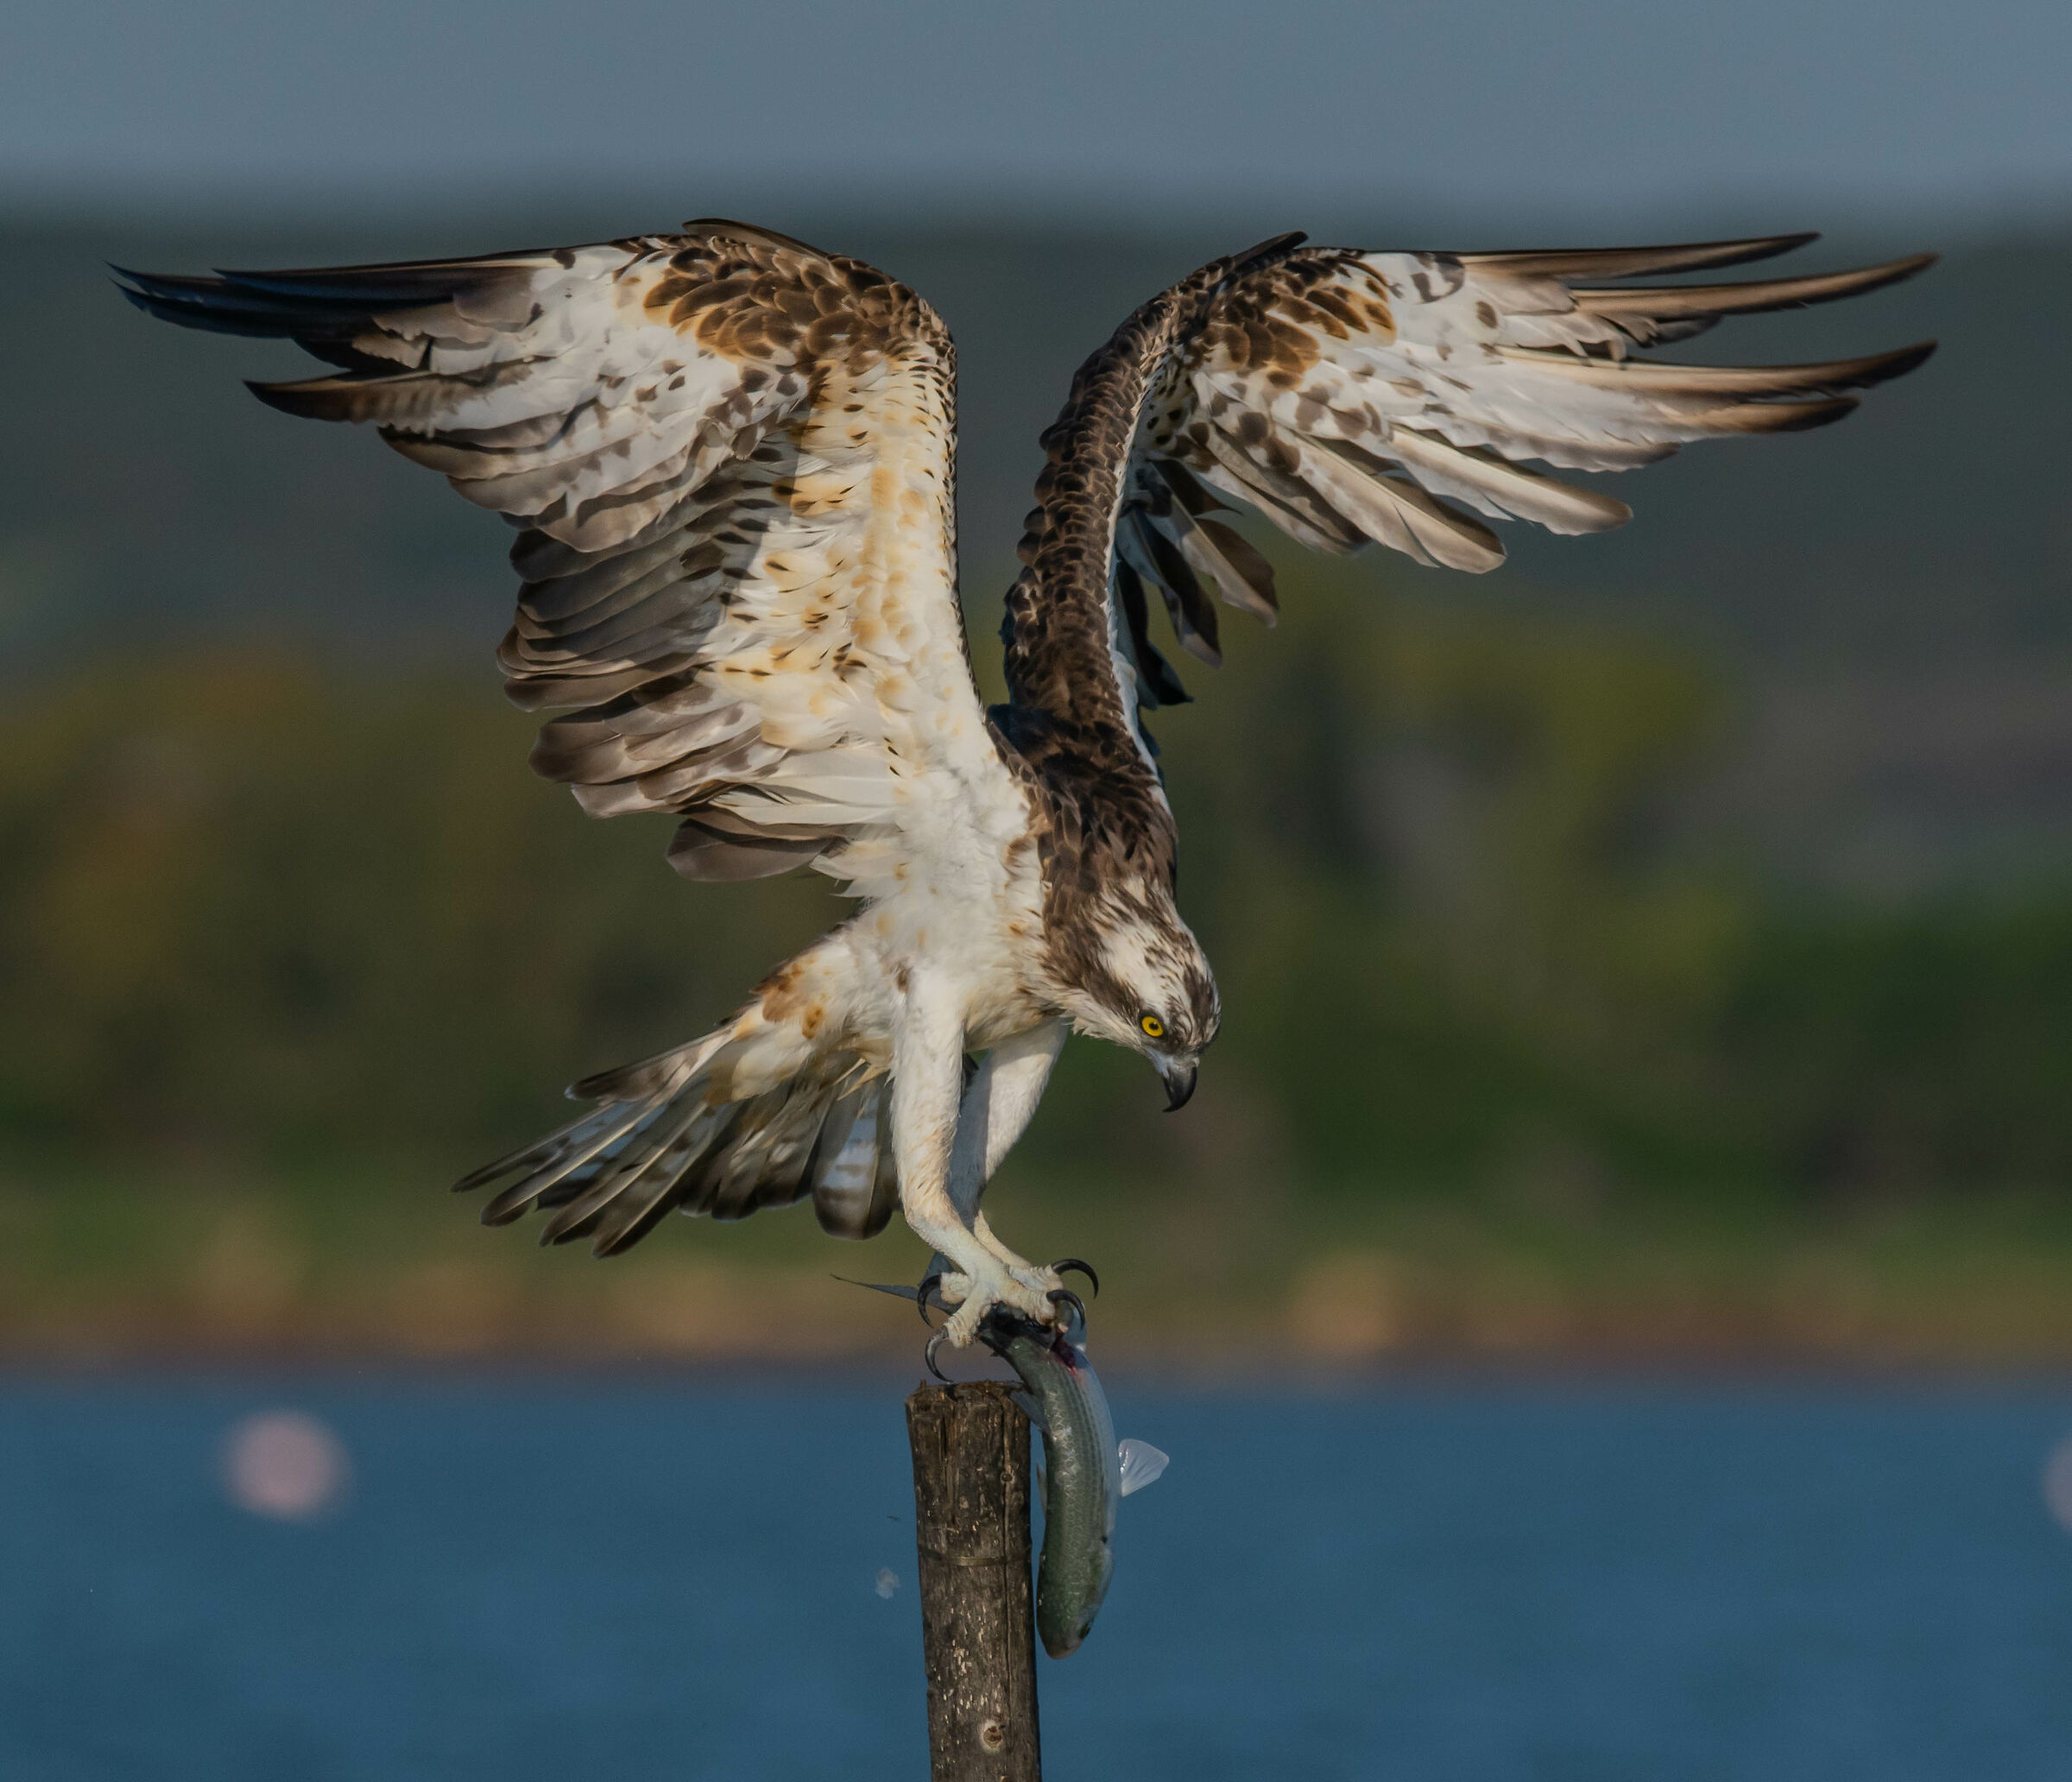 Another fish for the osprey!...